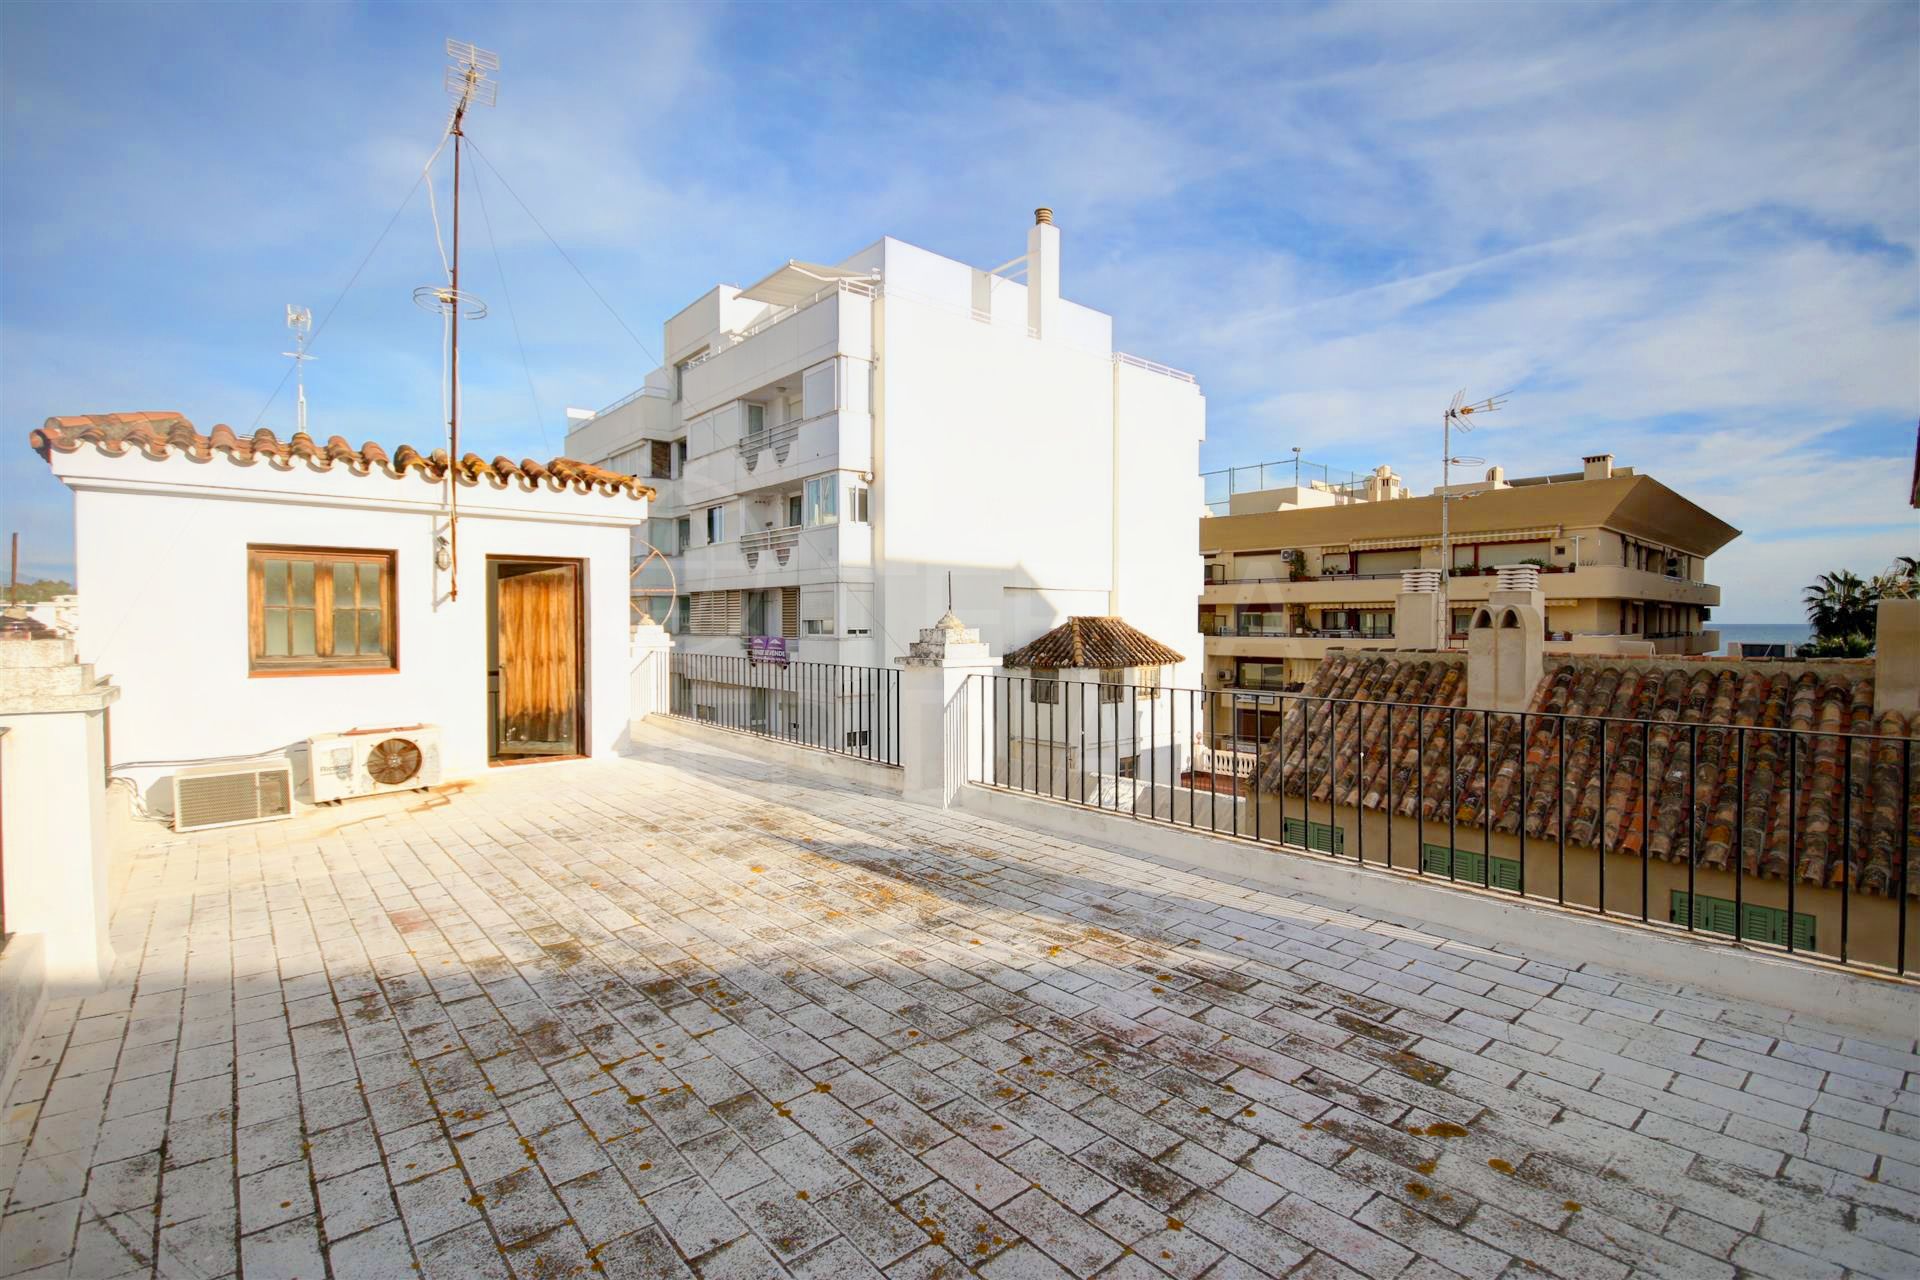 Building with offices for sale on the main street in Estepona old town, close to the beach